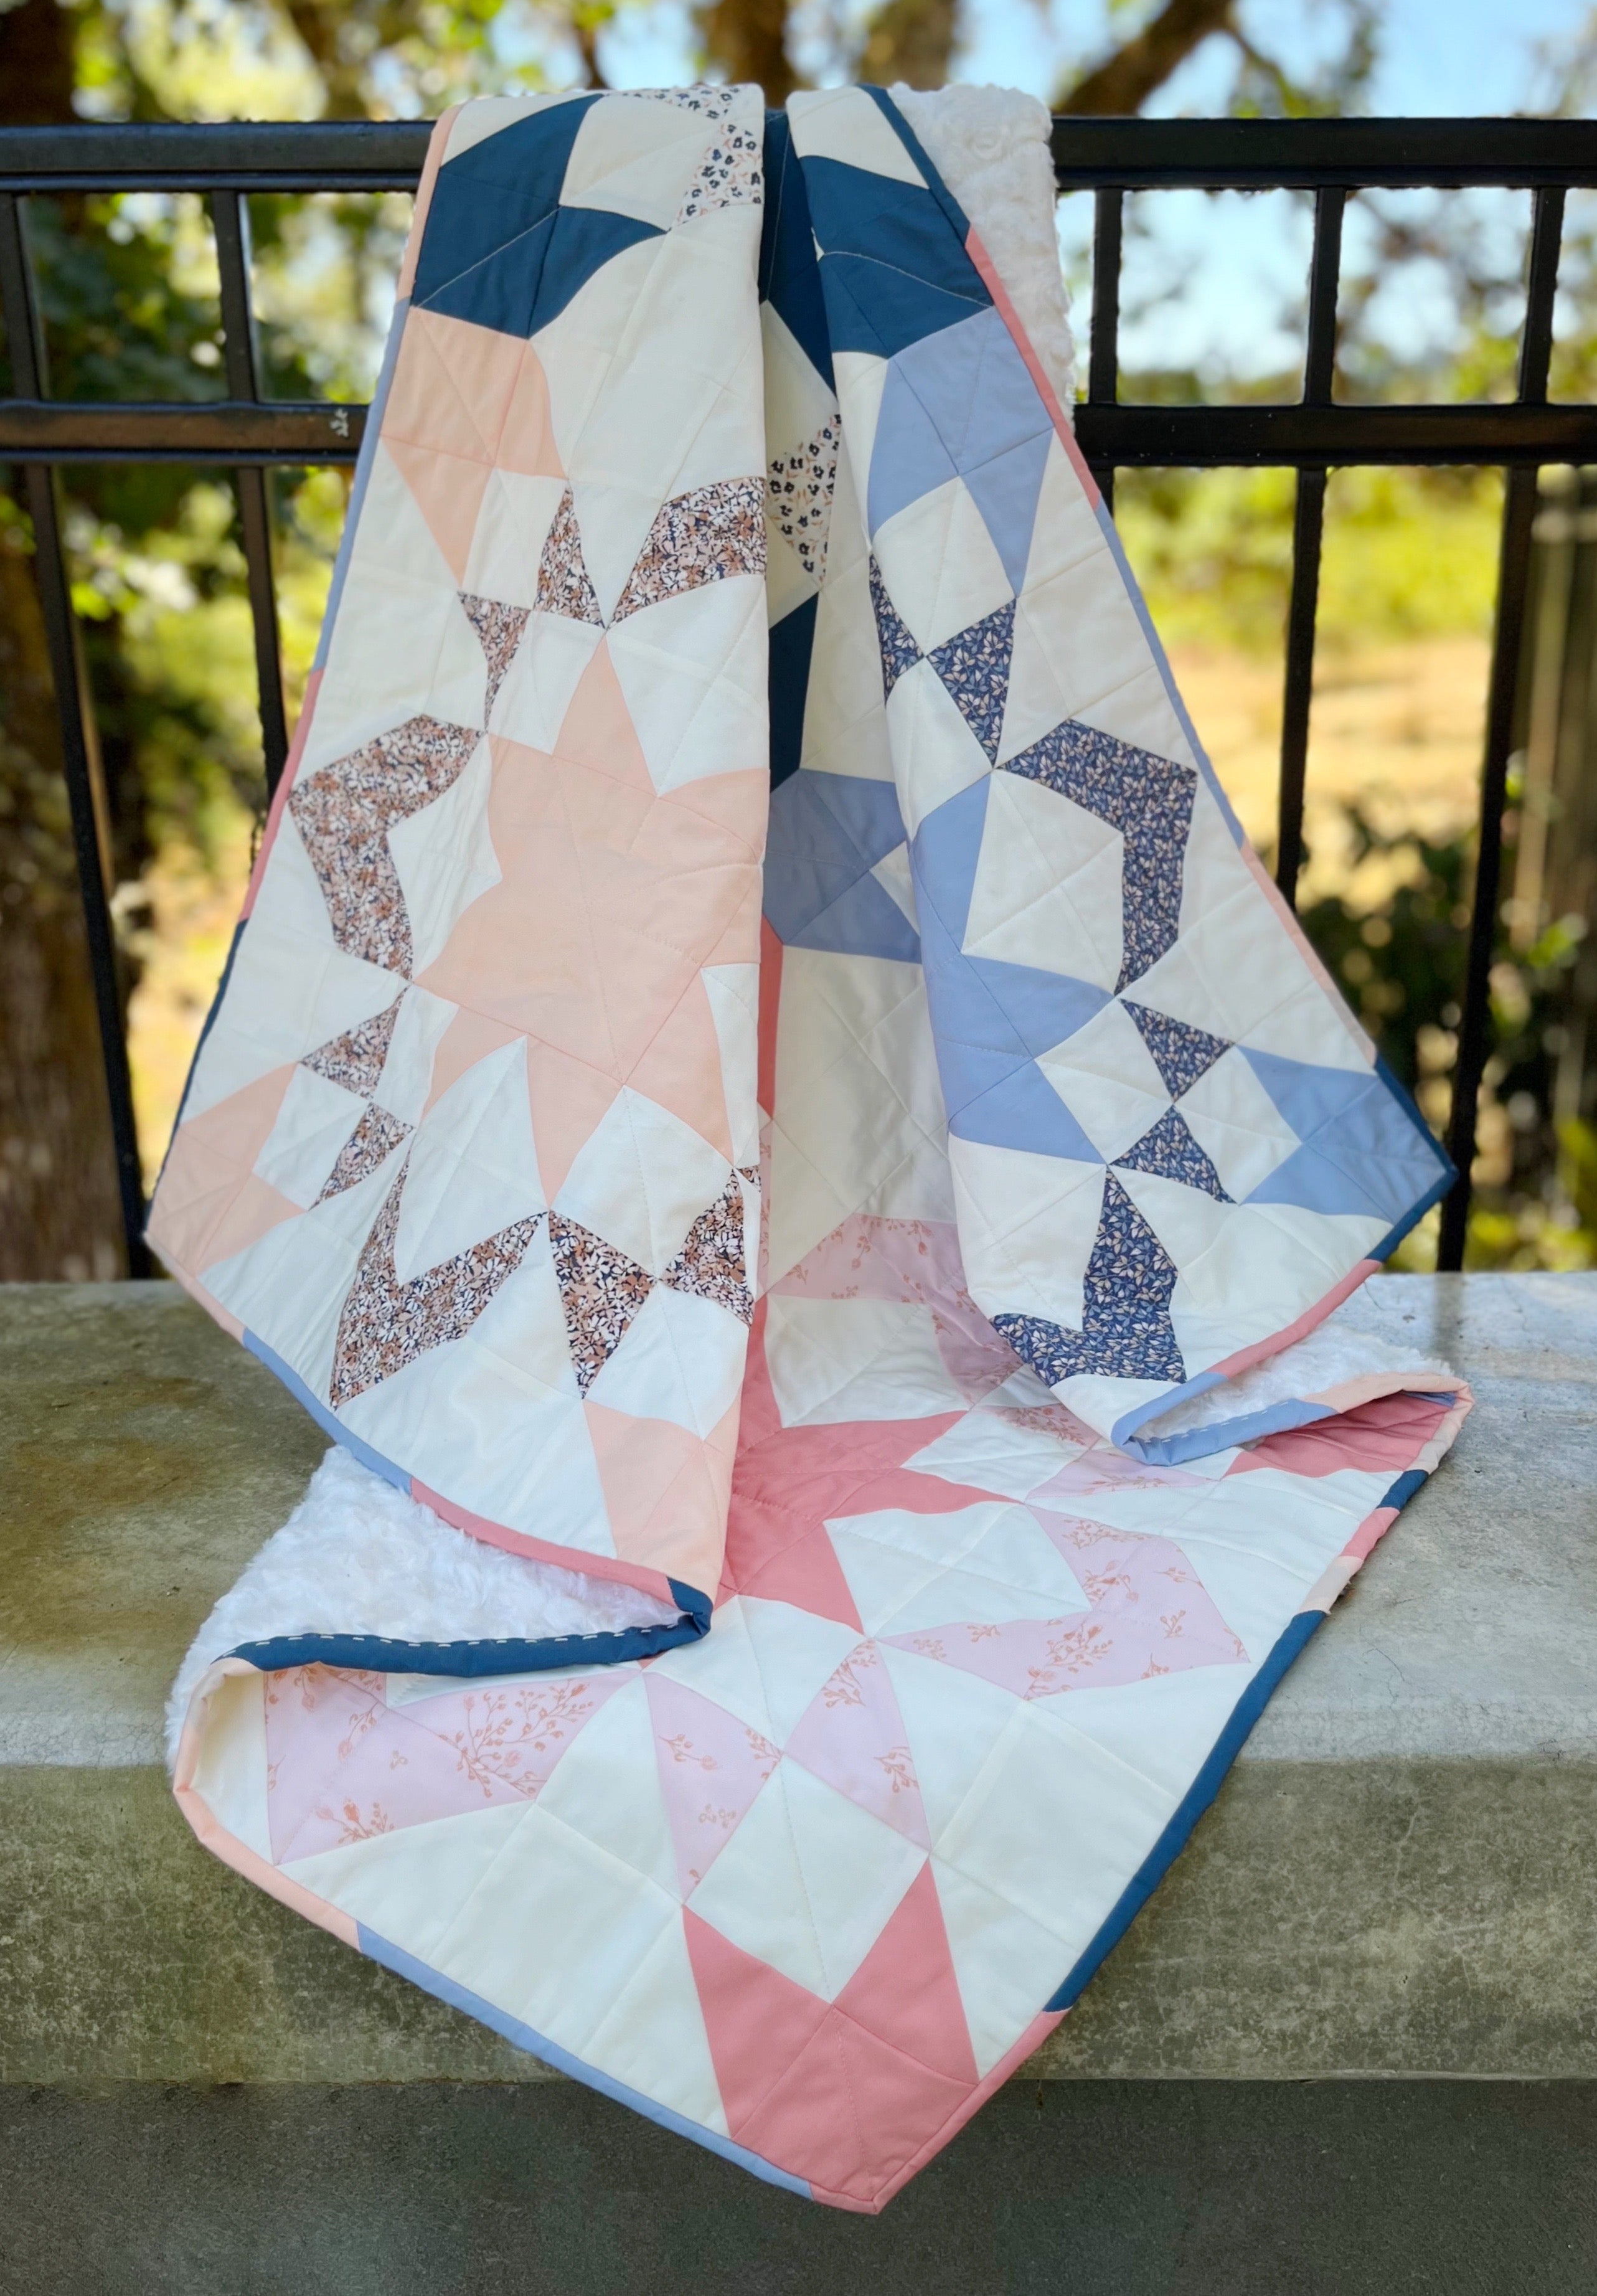 Starly Quilt made by Lauren. A modern but classic sawtooth star block quilt pattern by Cotton and Joy.